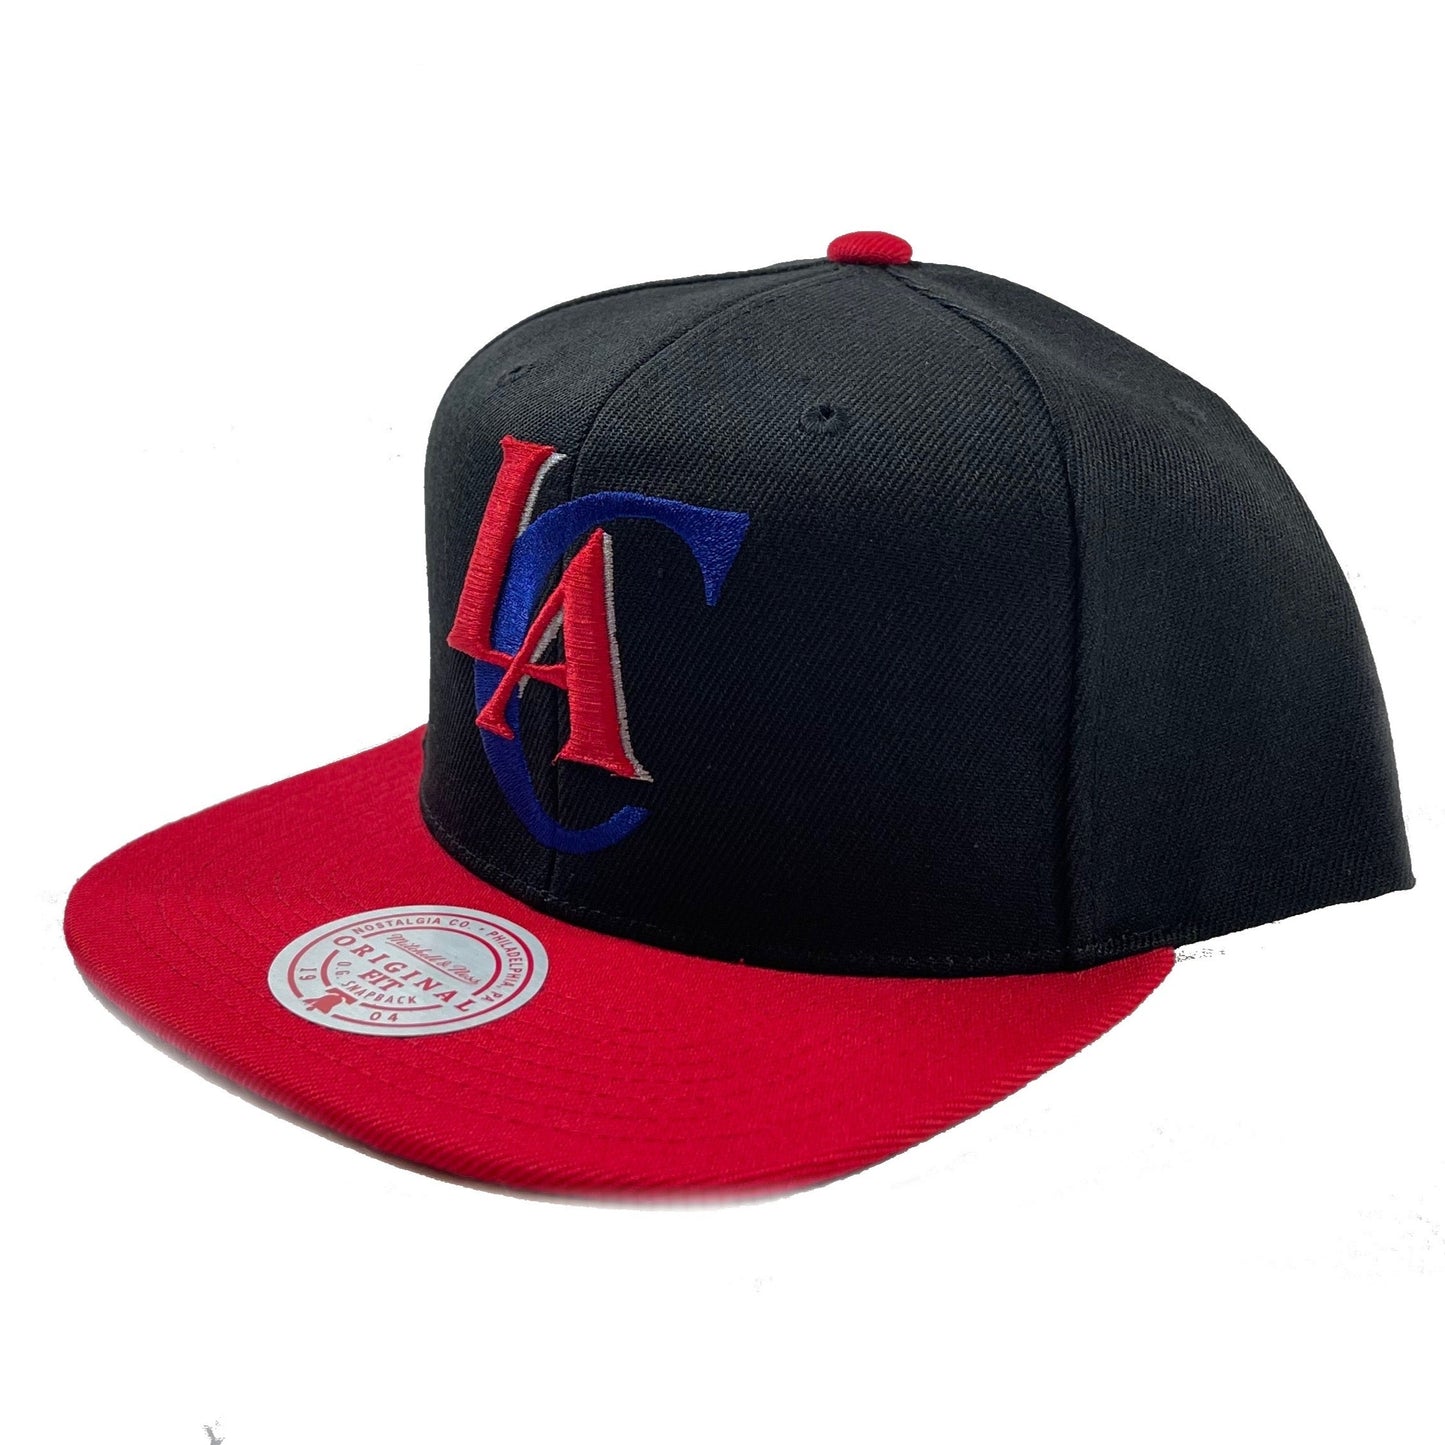 Los Angeles Clippers (Black) Snapback